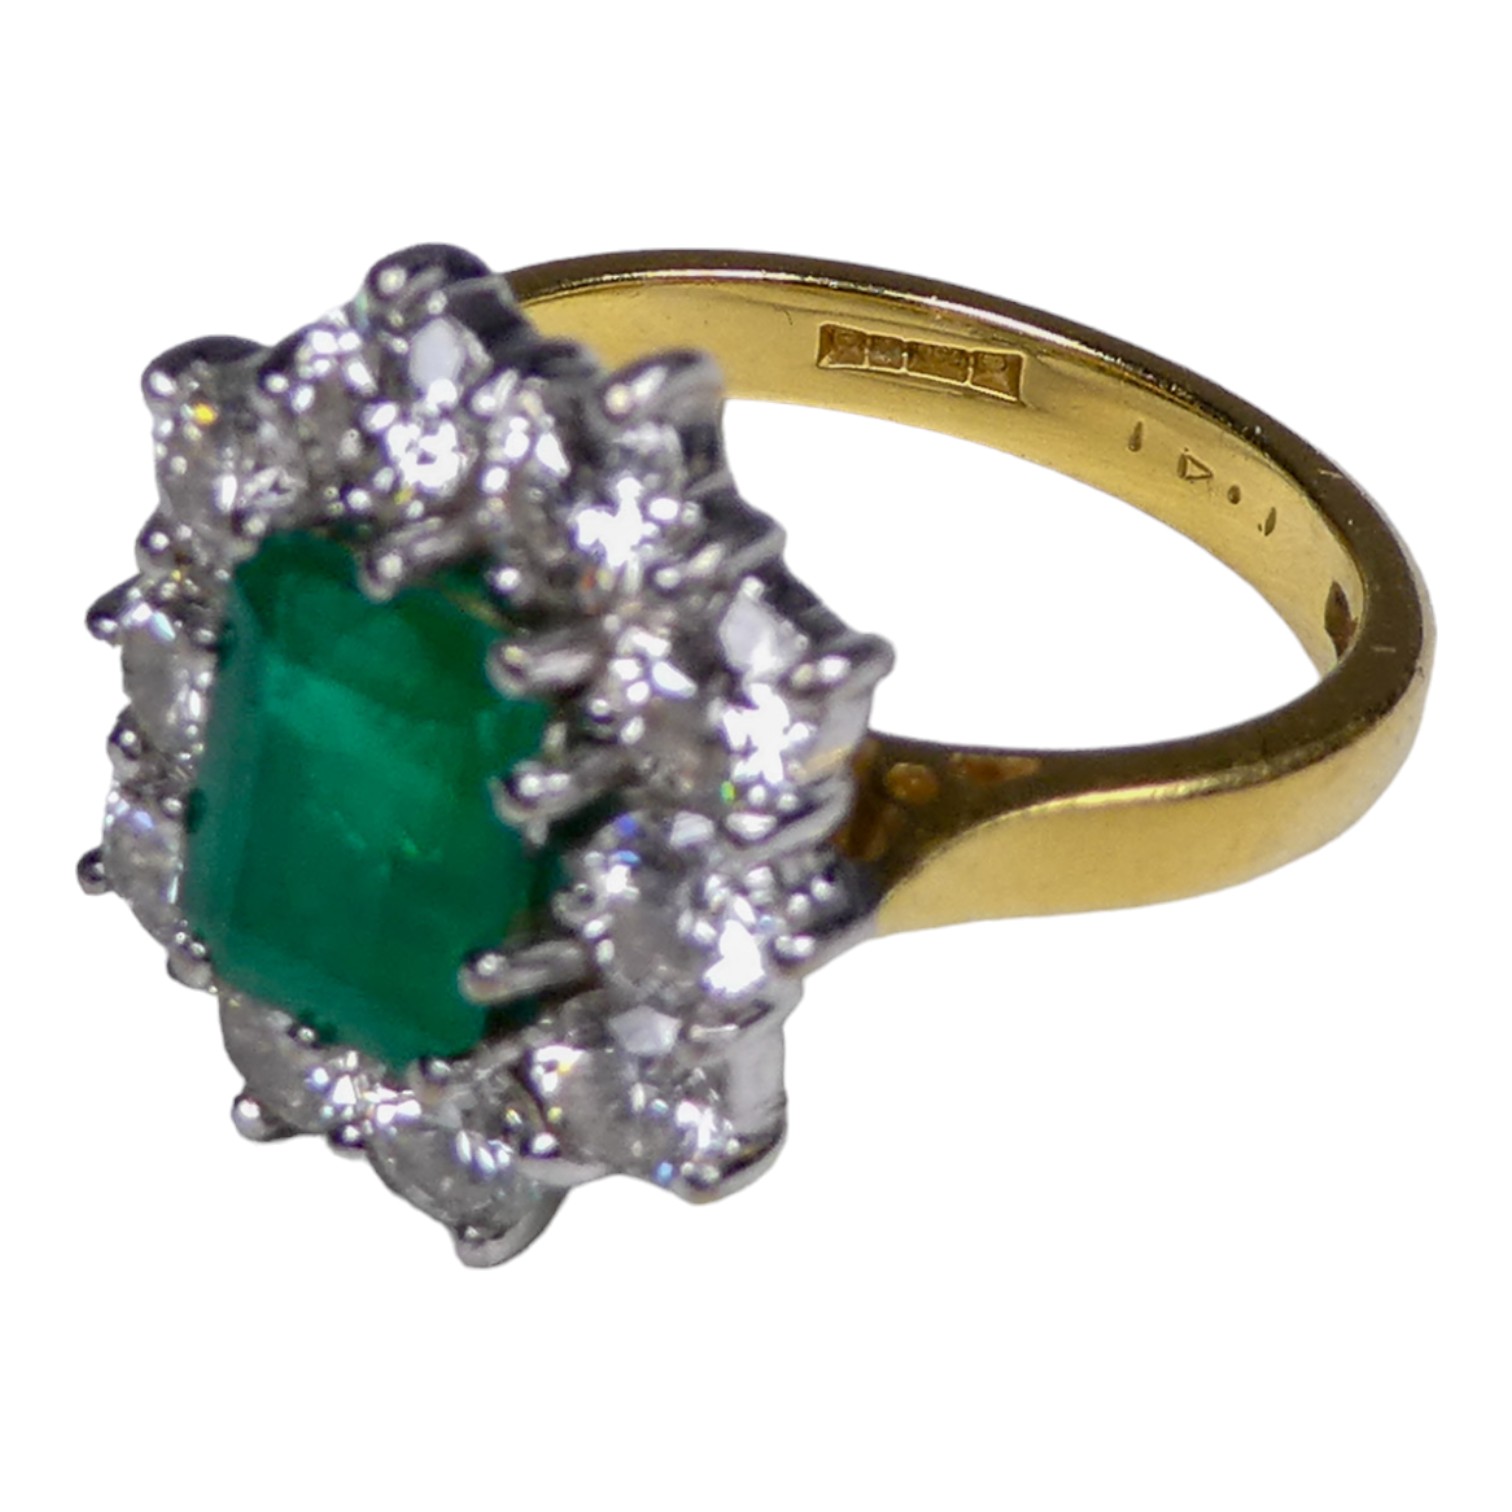 An 18ct yellow gold emerald and diamond cluster ring - size M/N, weight 8.5g. - Bild 3 aus 3